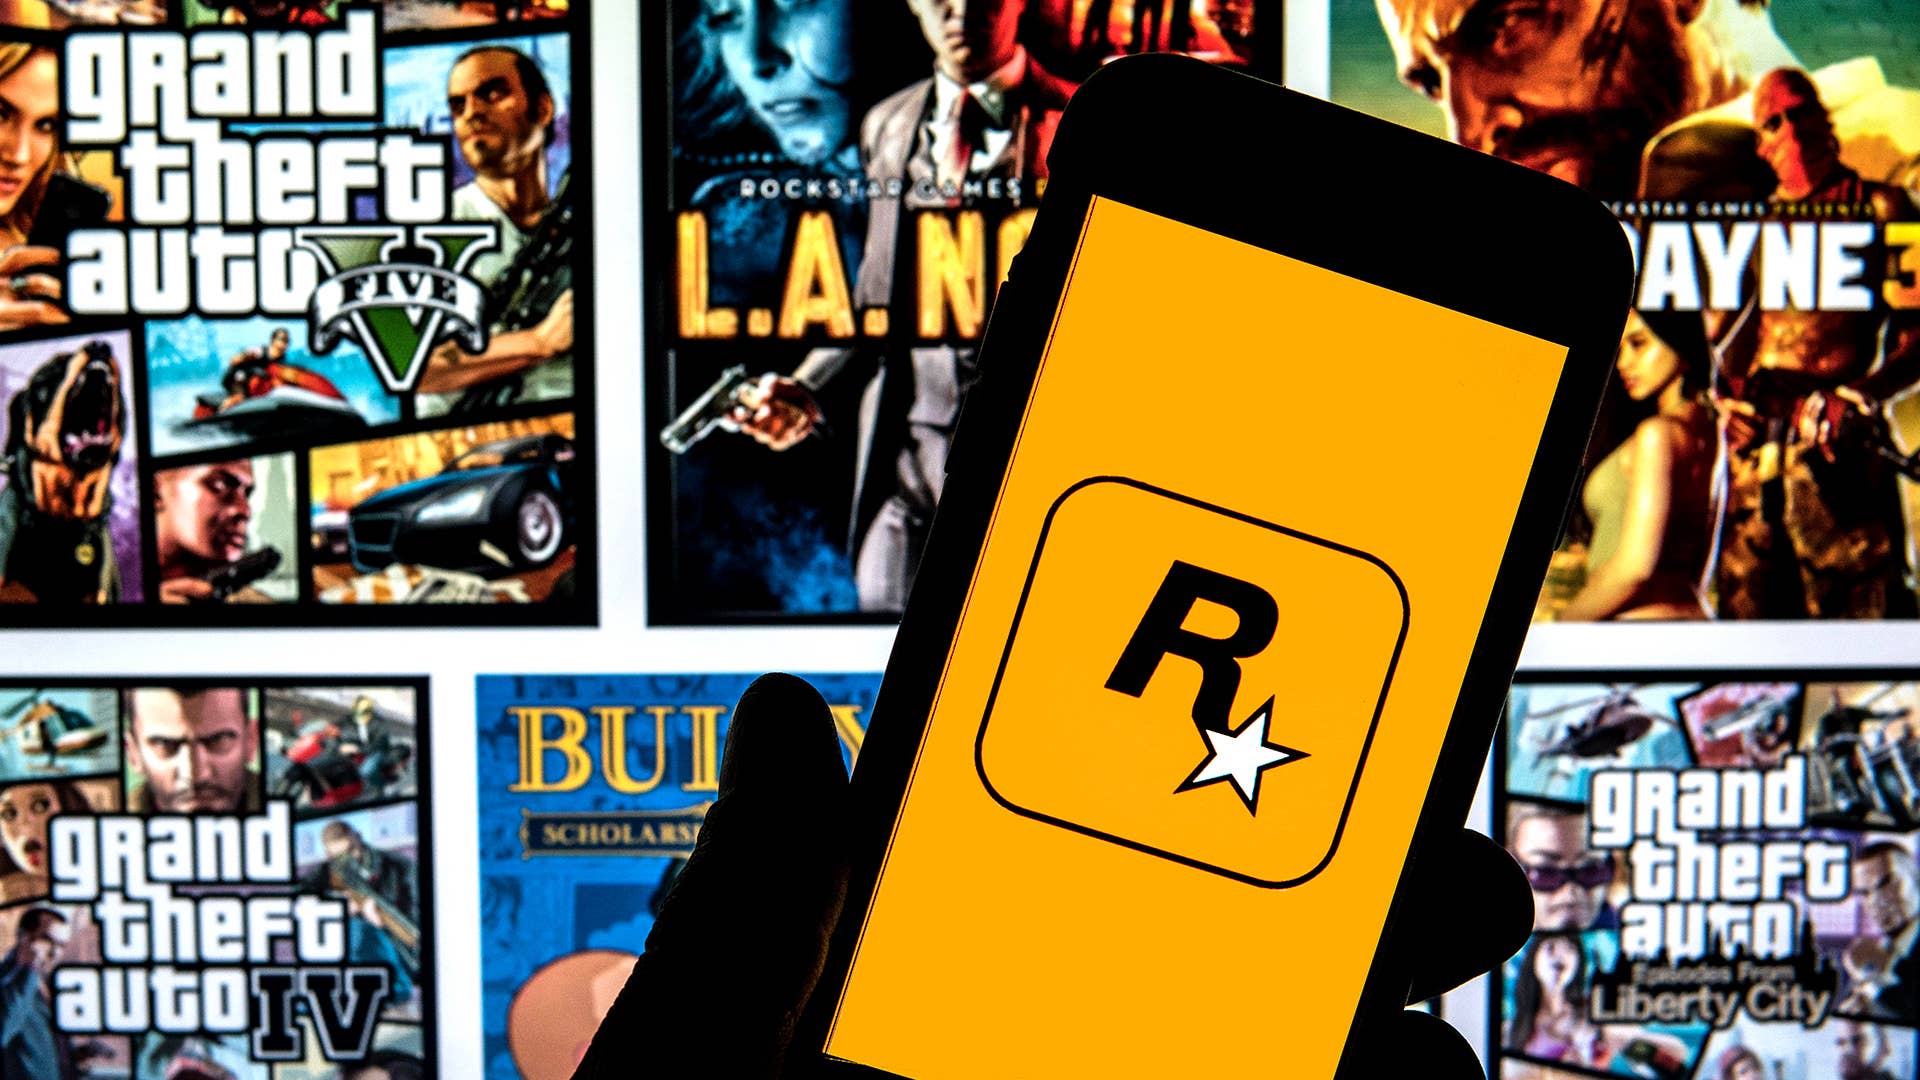 In this photo illustration a Rockstar Games logo seen displayed on a smartphone with video games cover in the background